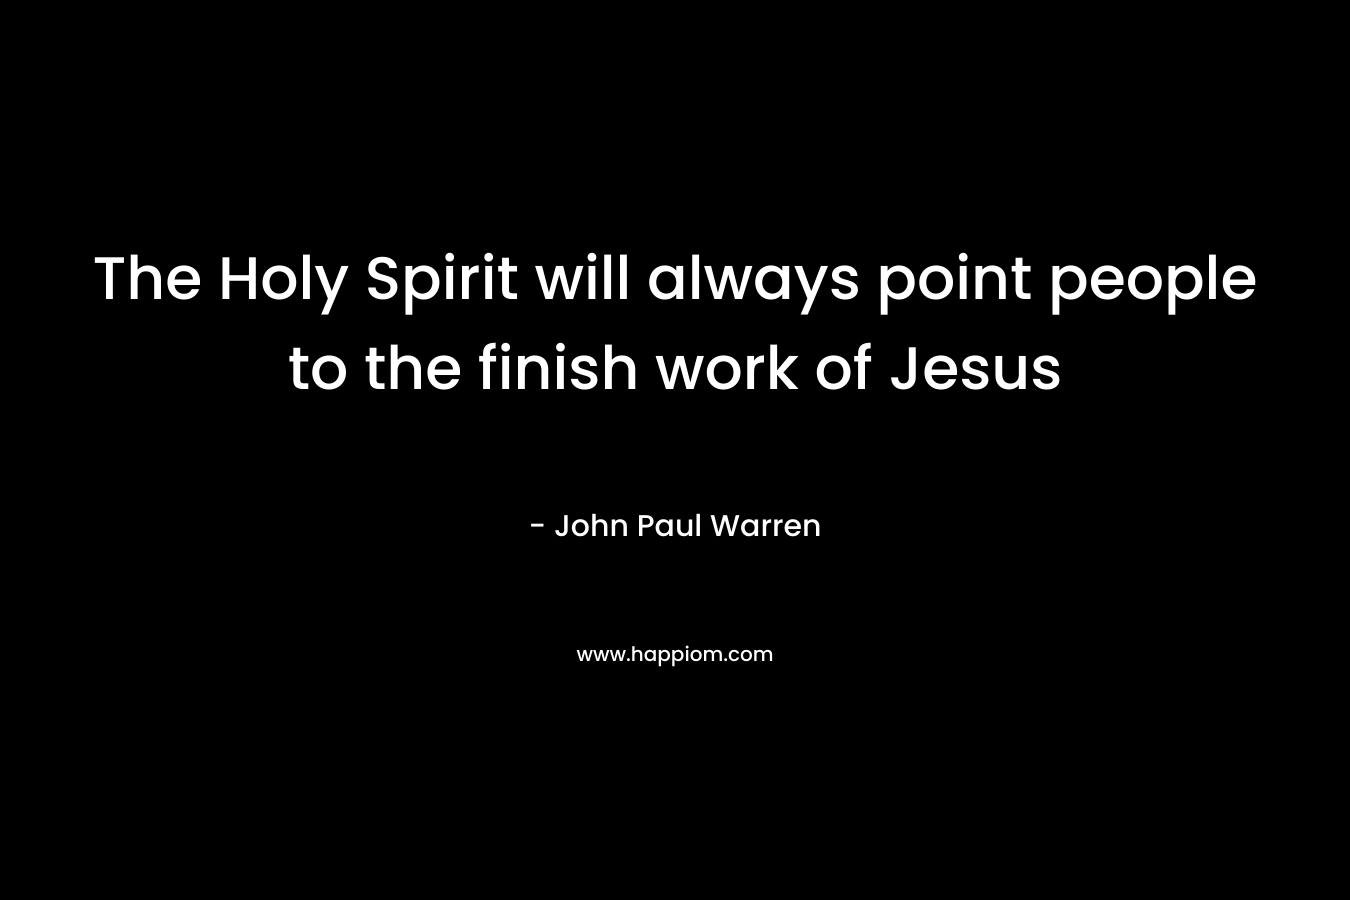 The Holy Spirit will always point people to the finish work of Jesus